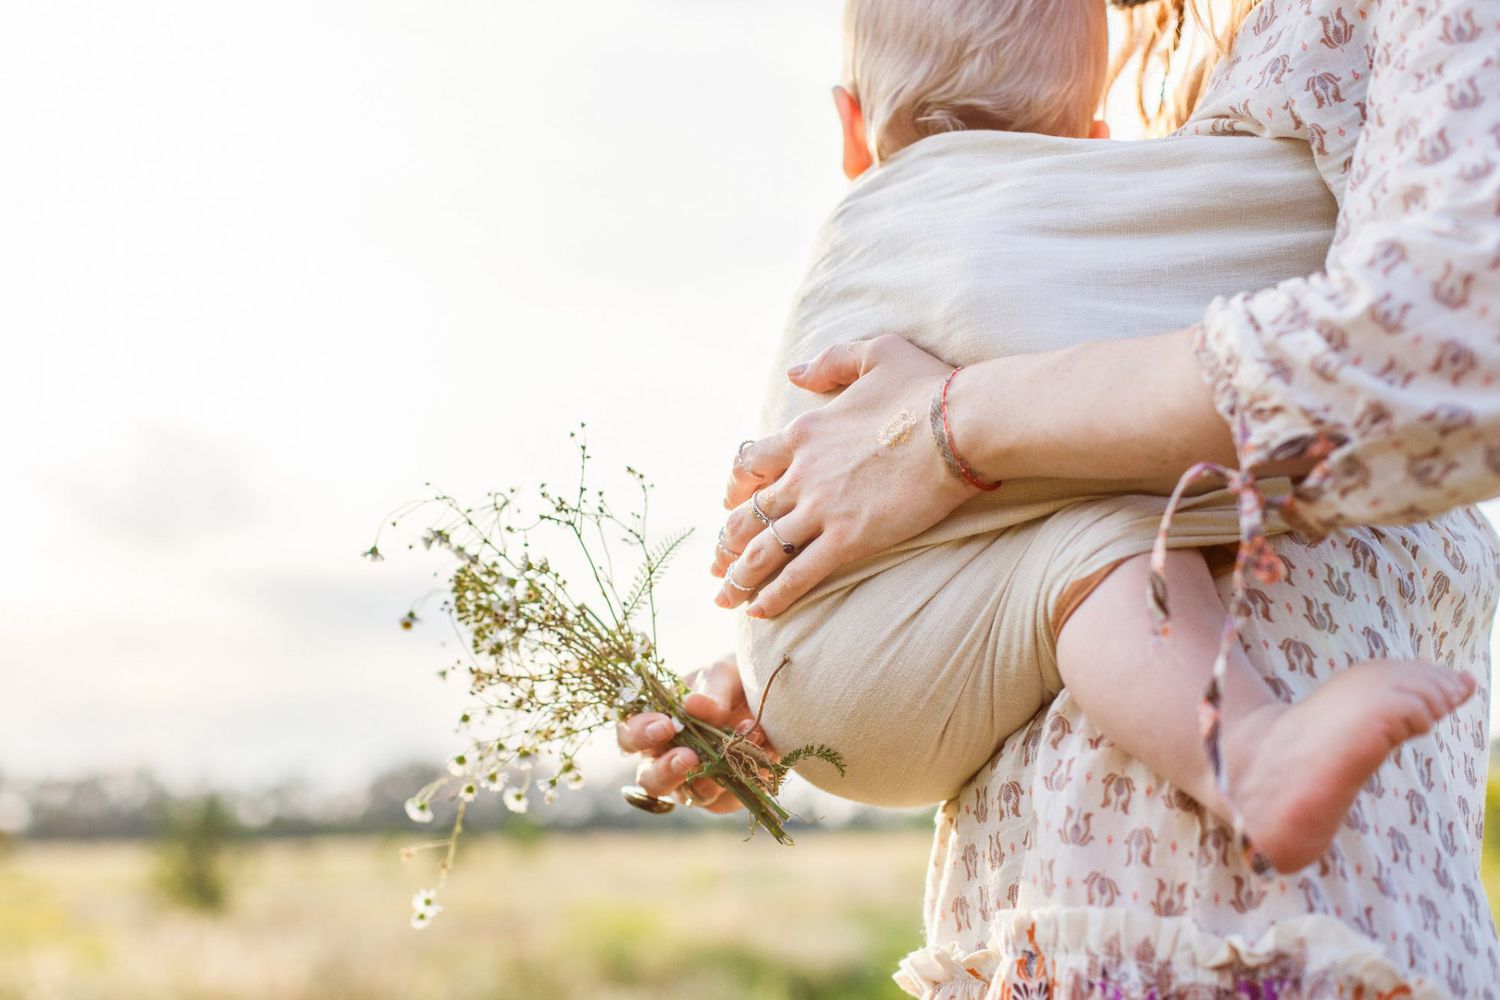 An image of a mom holding her baby in a field.